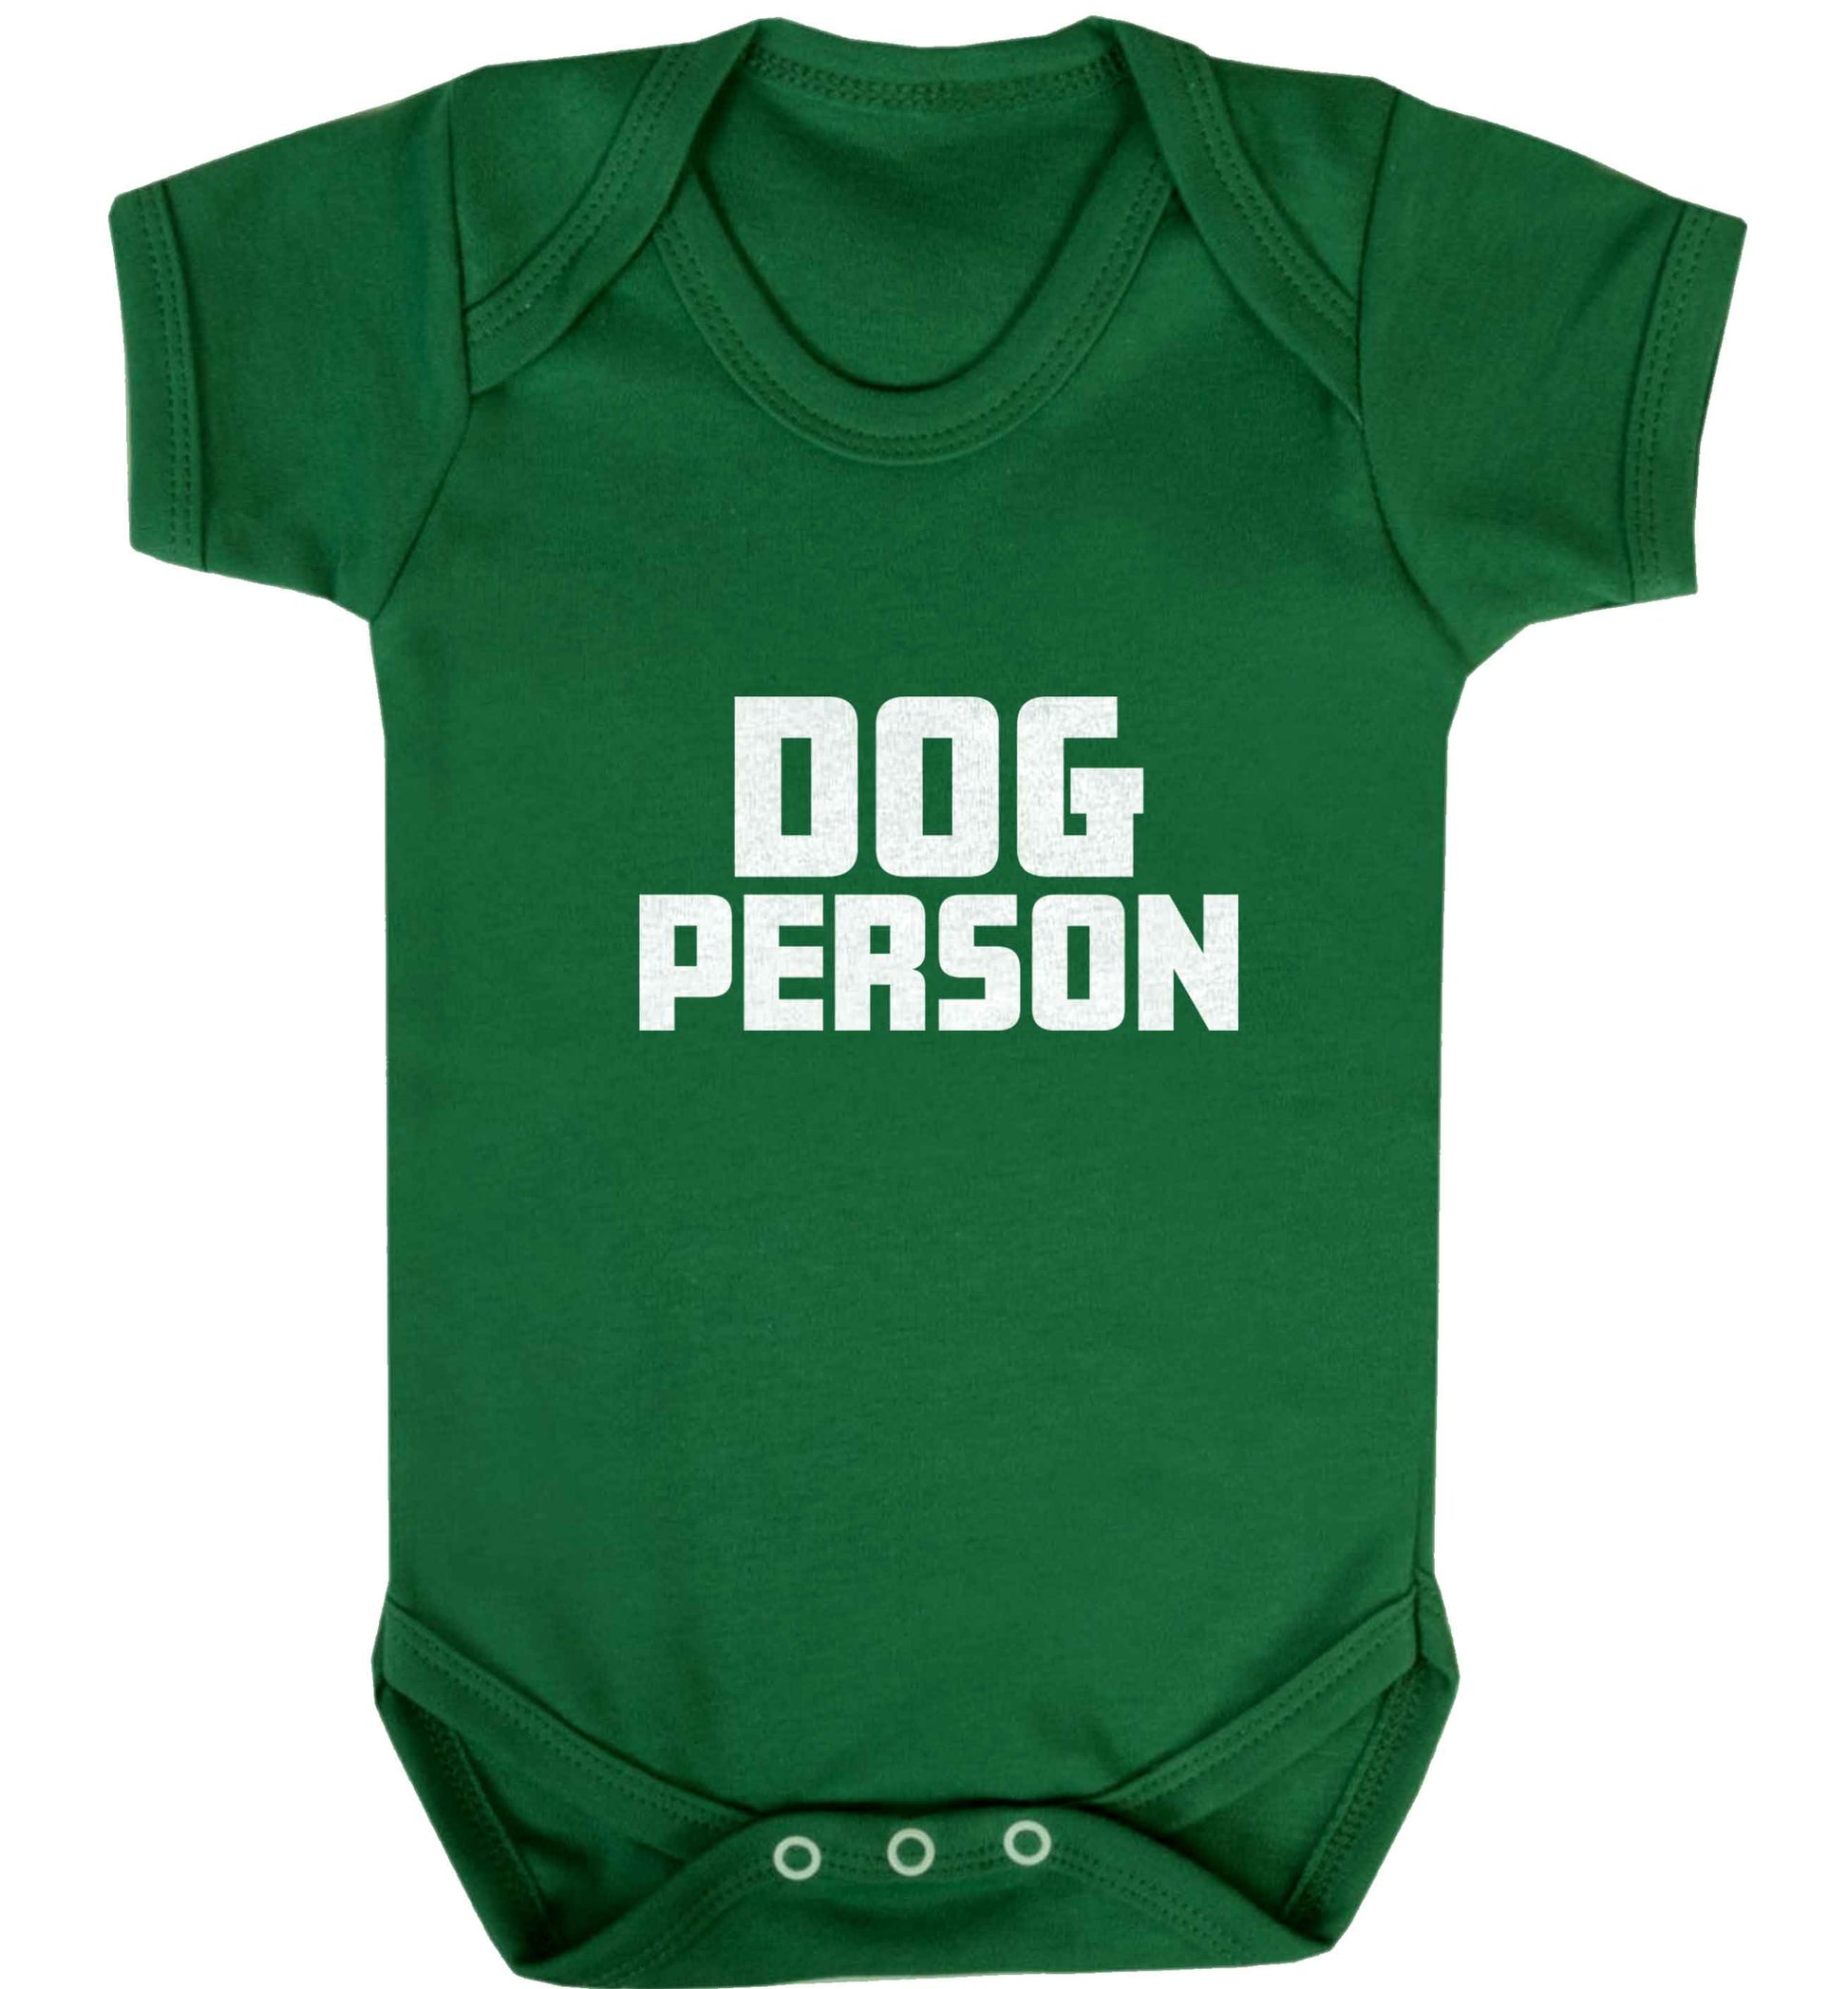 Dog Person Kit baby vest green 18-24 months